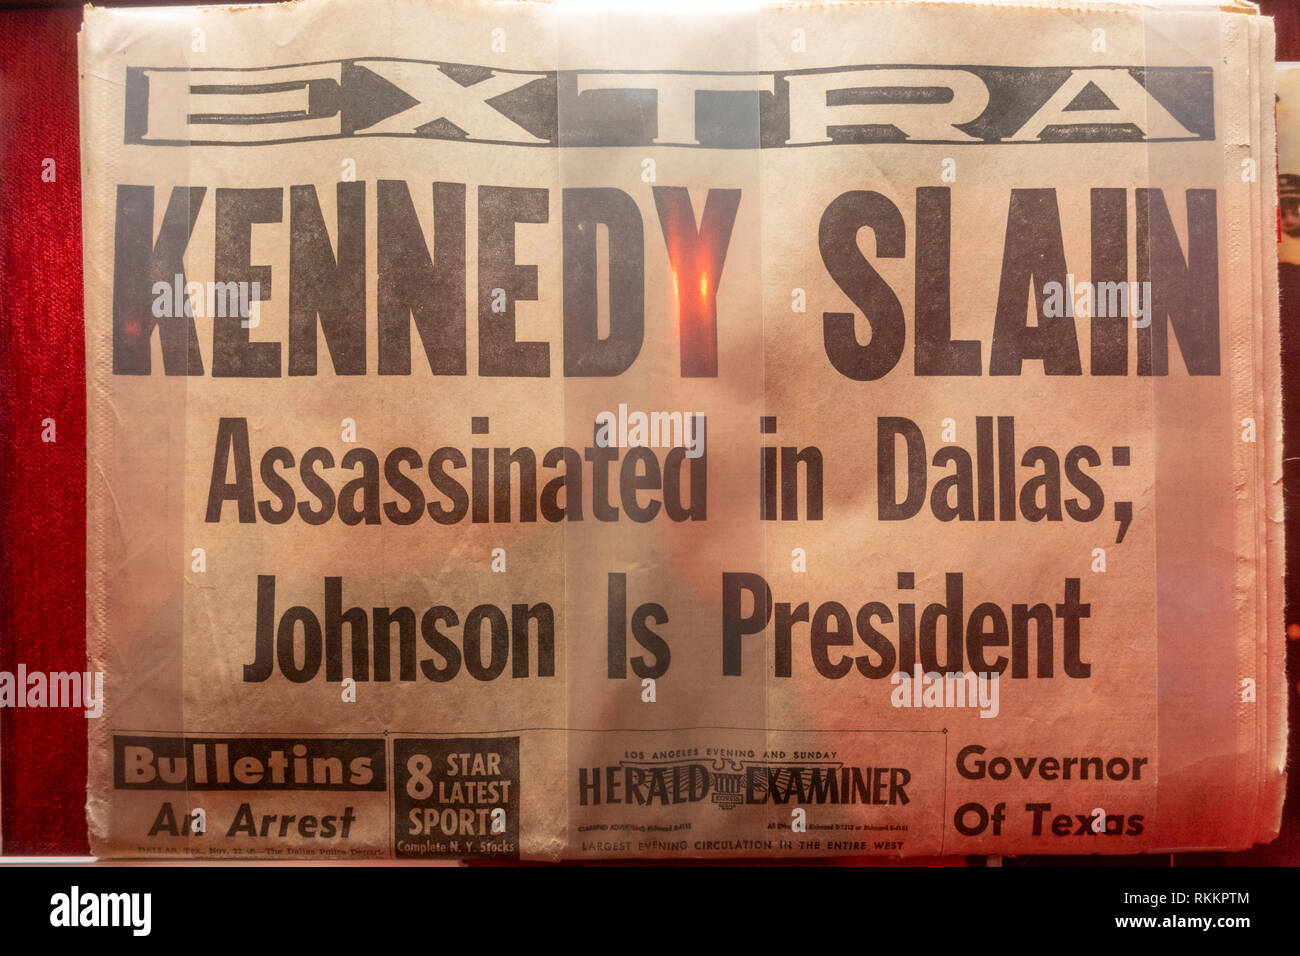 Herald Examiner (Los Angeles) following the assassination of John F Kennedy, The Mob Museum, Las Vegas (City of Las Vegas), Nevada, United States. Stock Photo